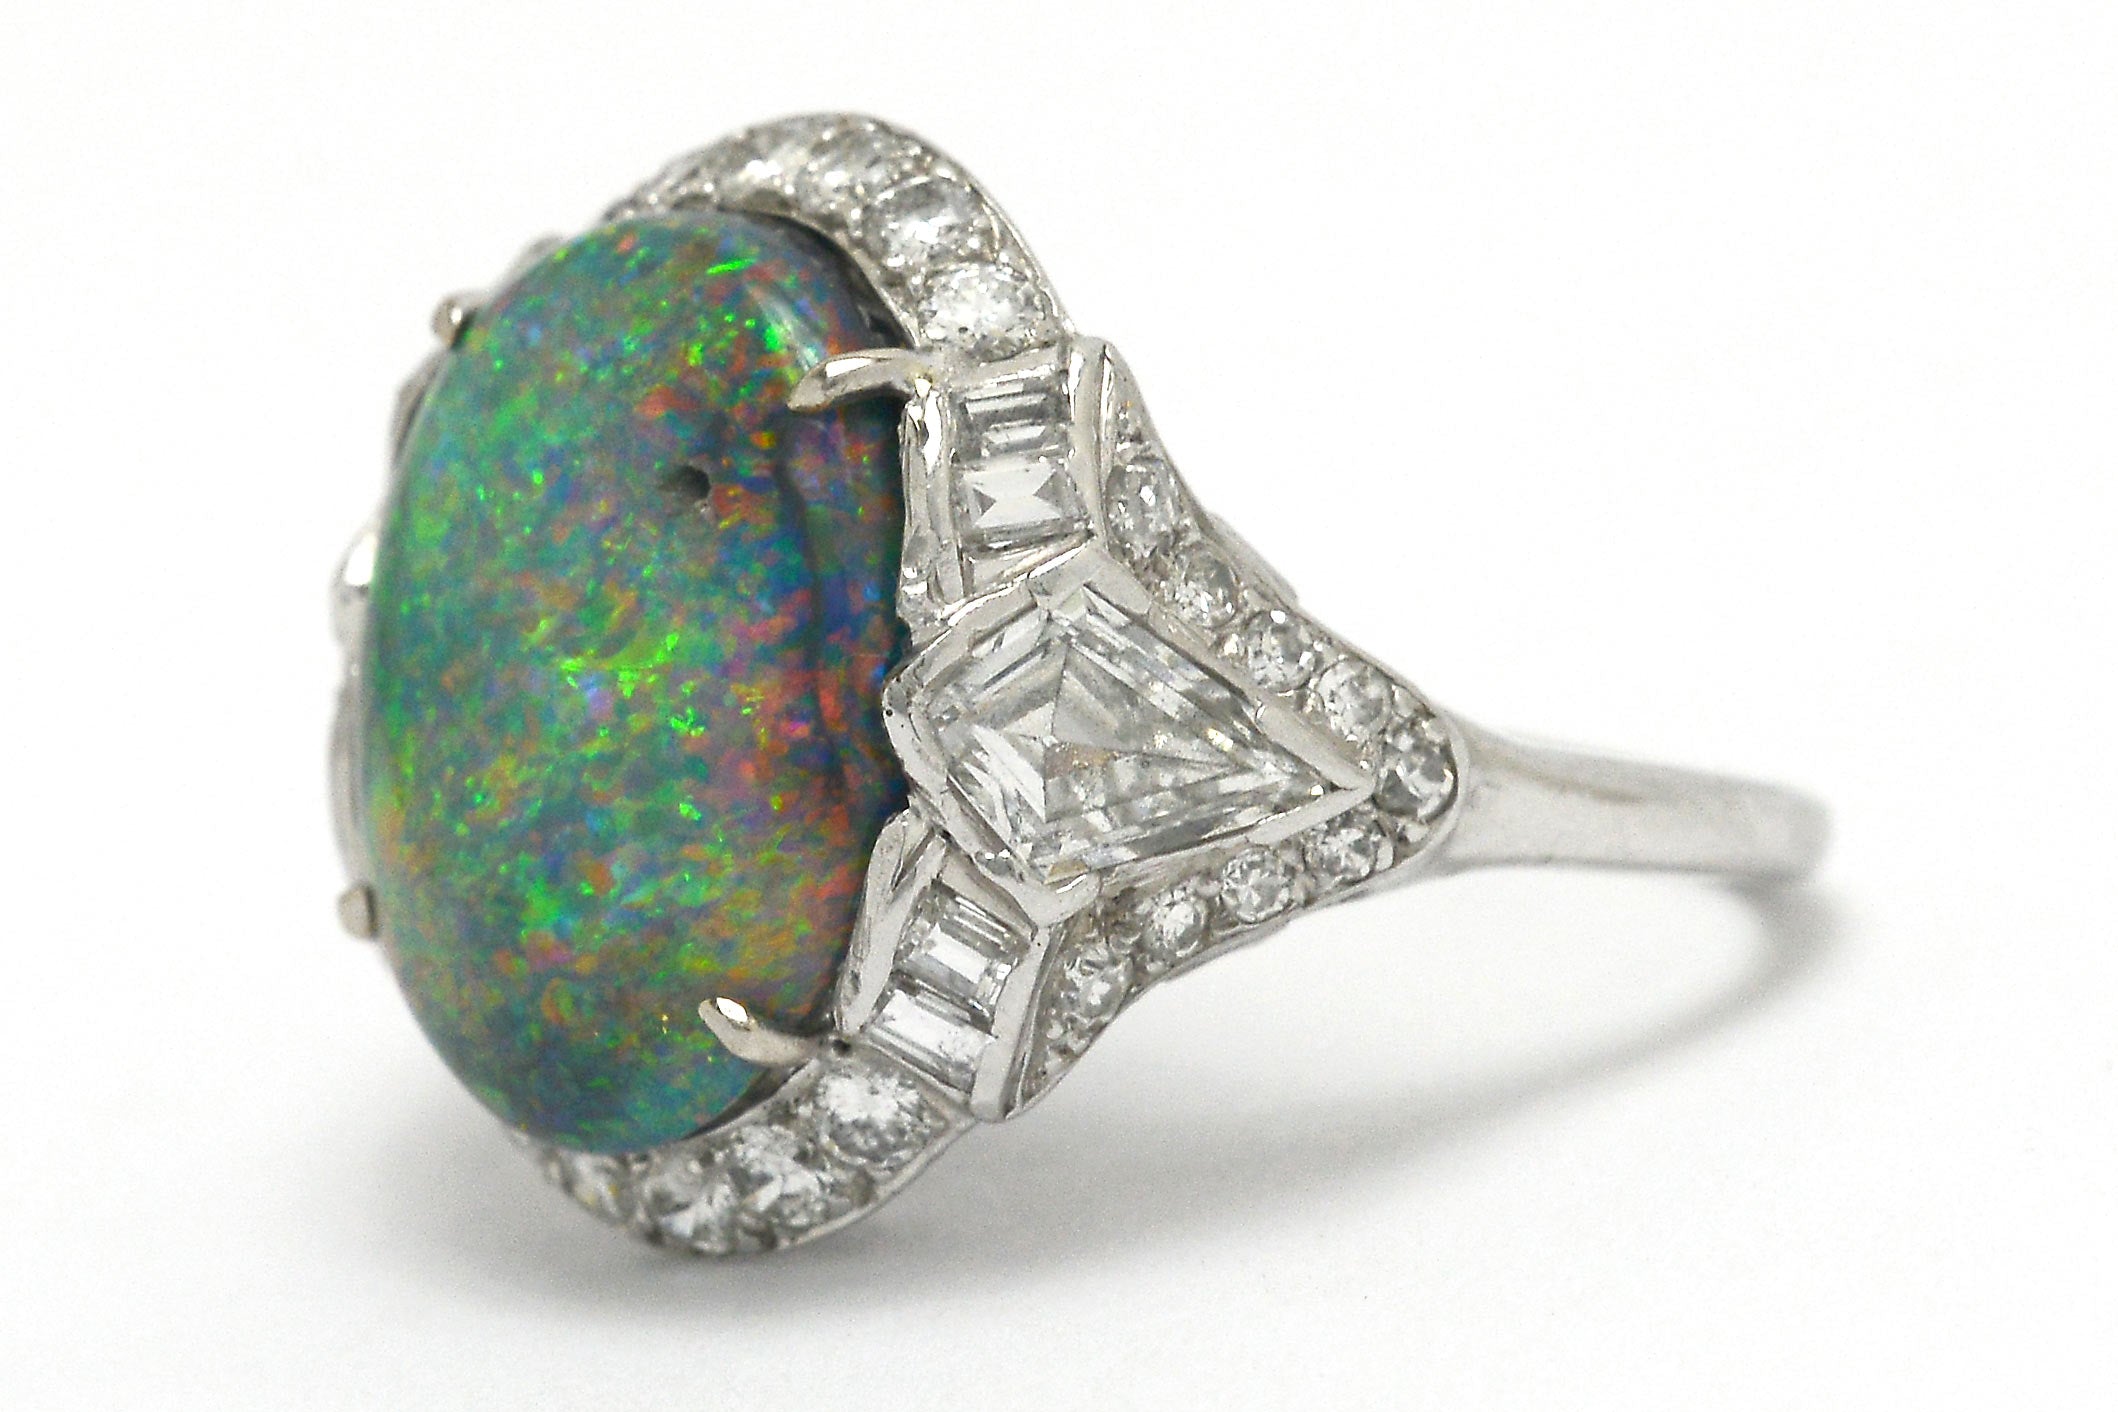 Dome black opal cocktail ring with kite and baguette diamonds.